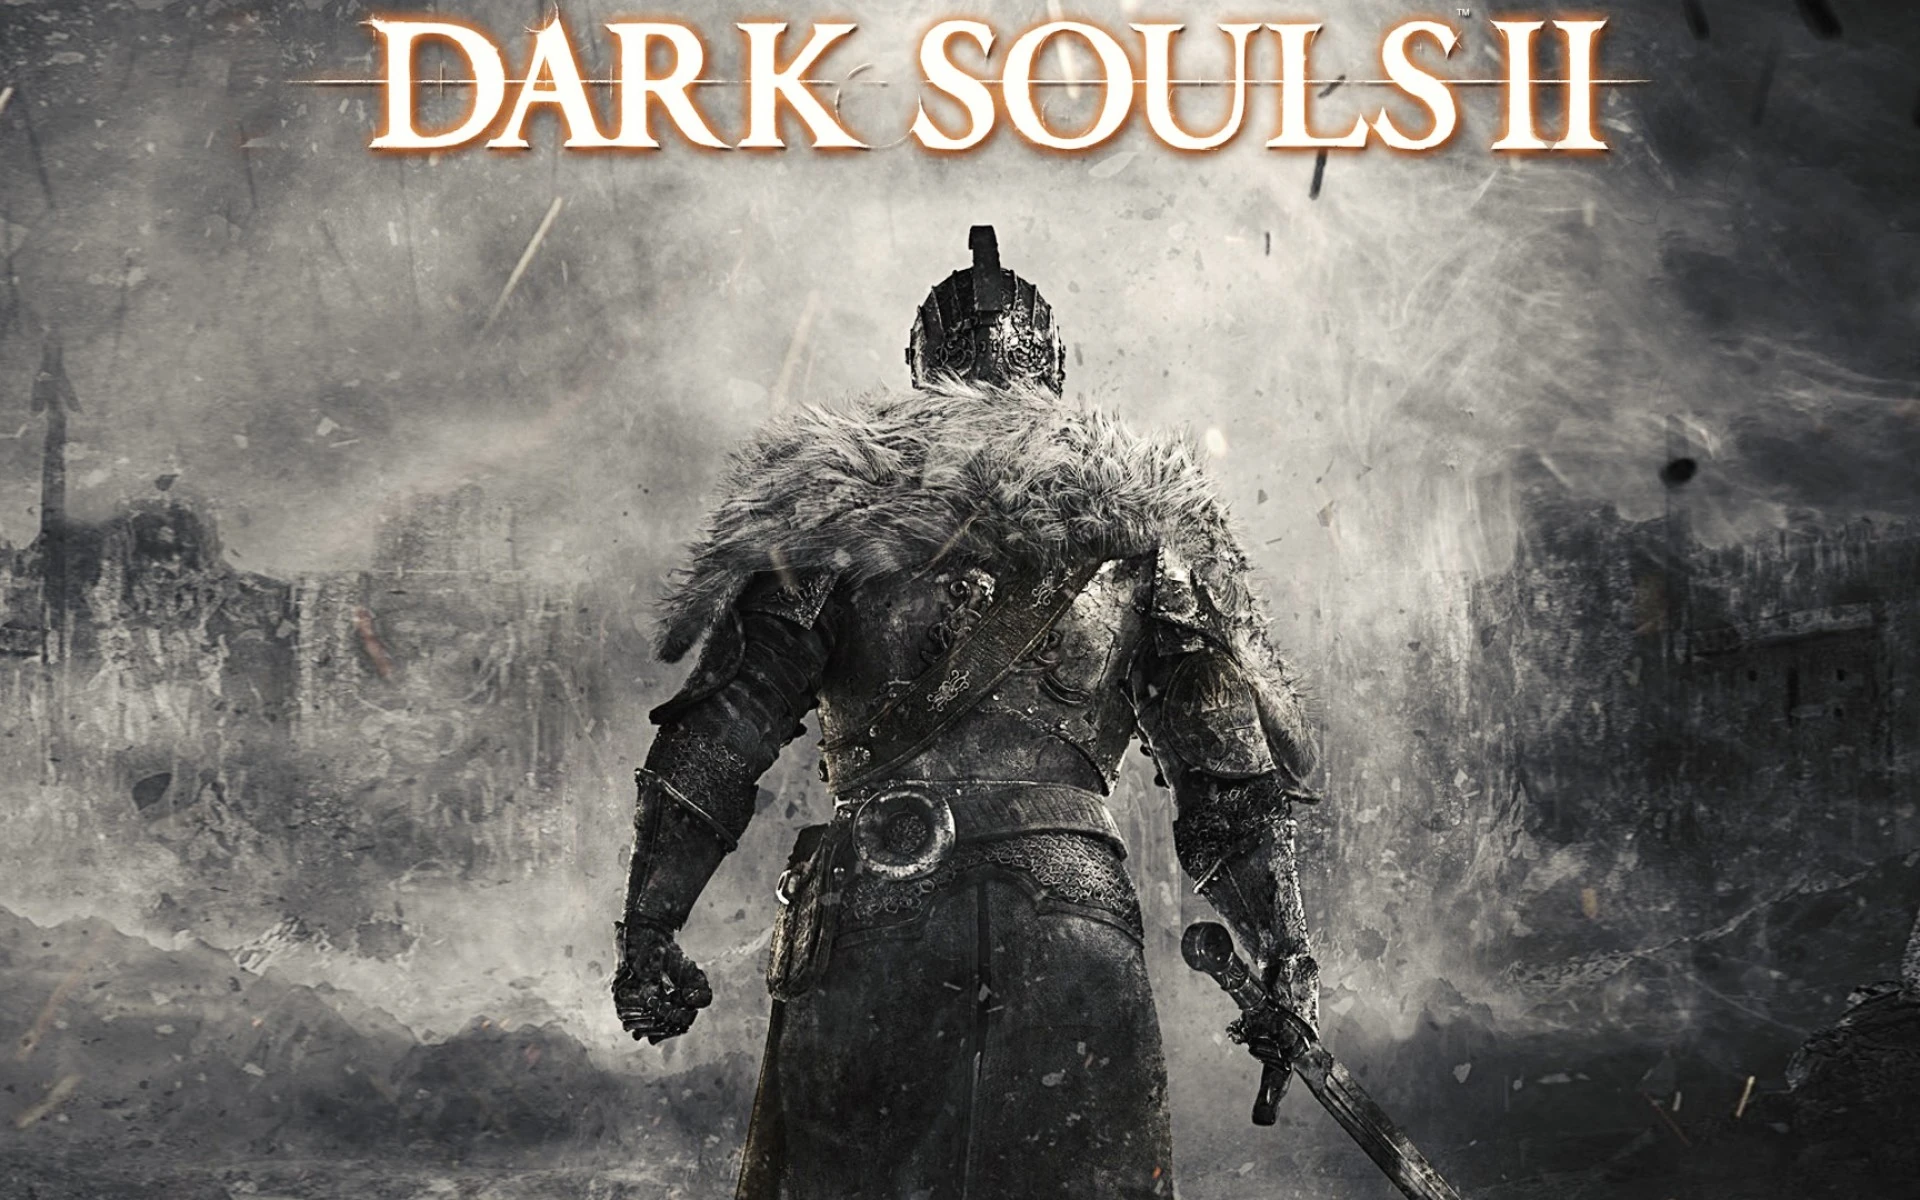 DARK SOULS 2: Can You GUESS All The Bosses?